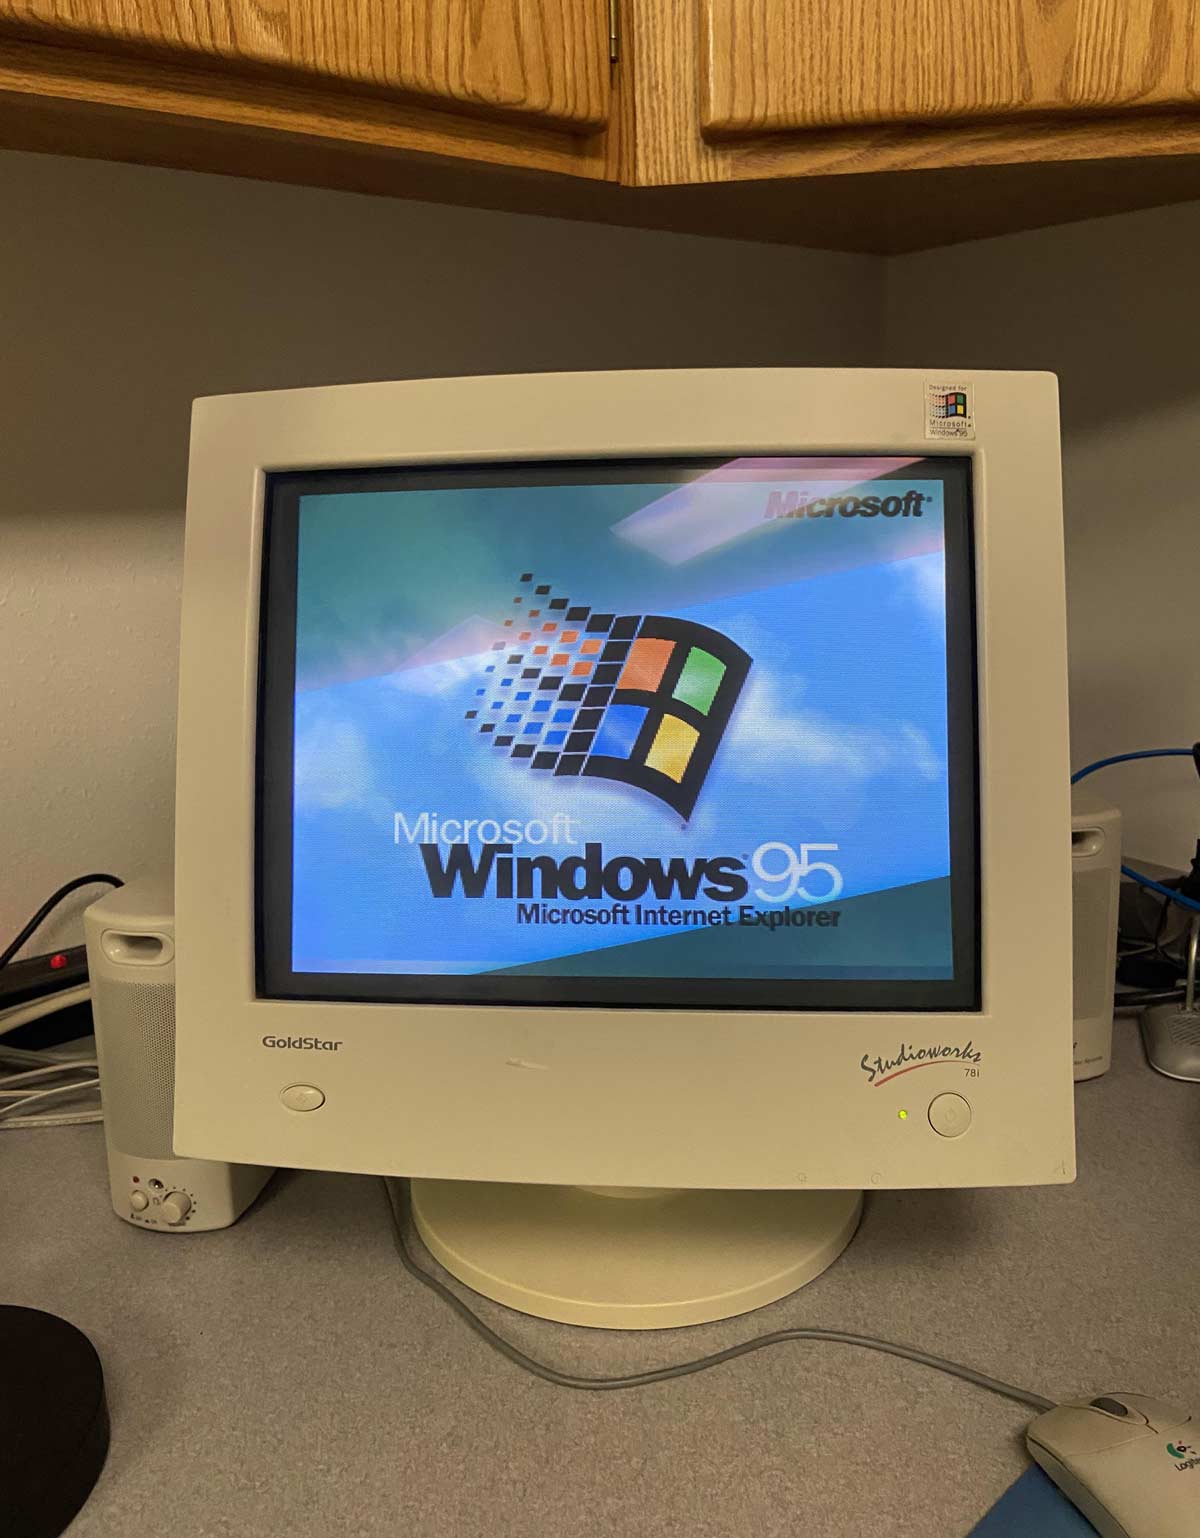 This computer at my grandmother’s house still uses Windows 95